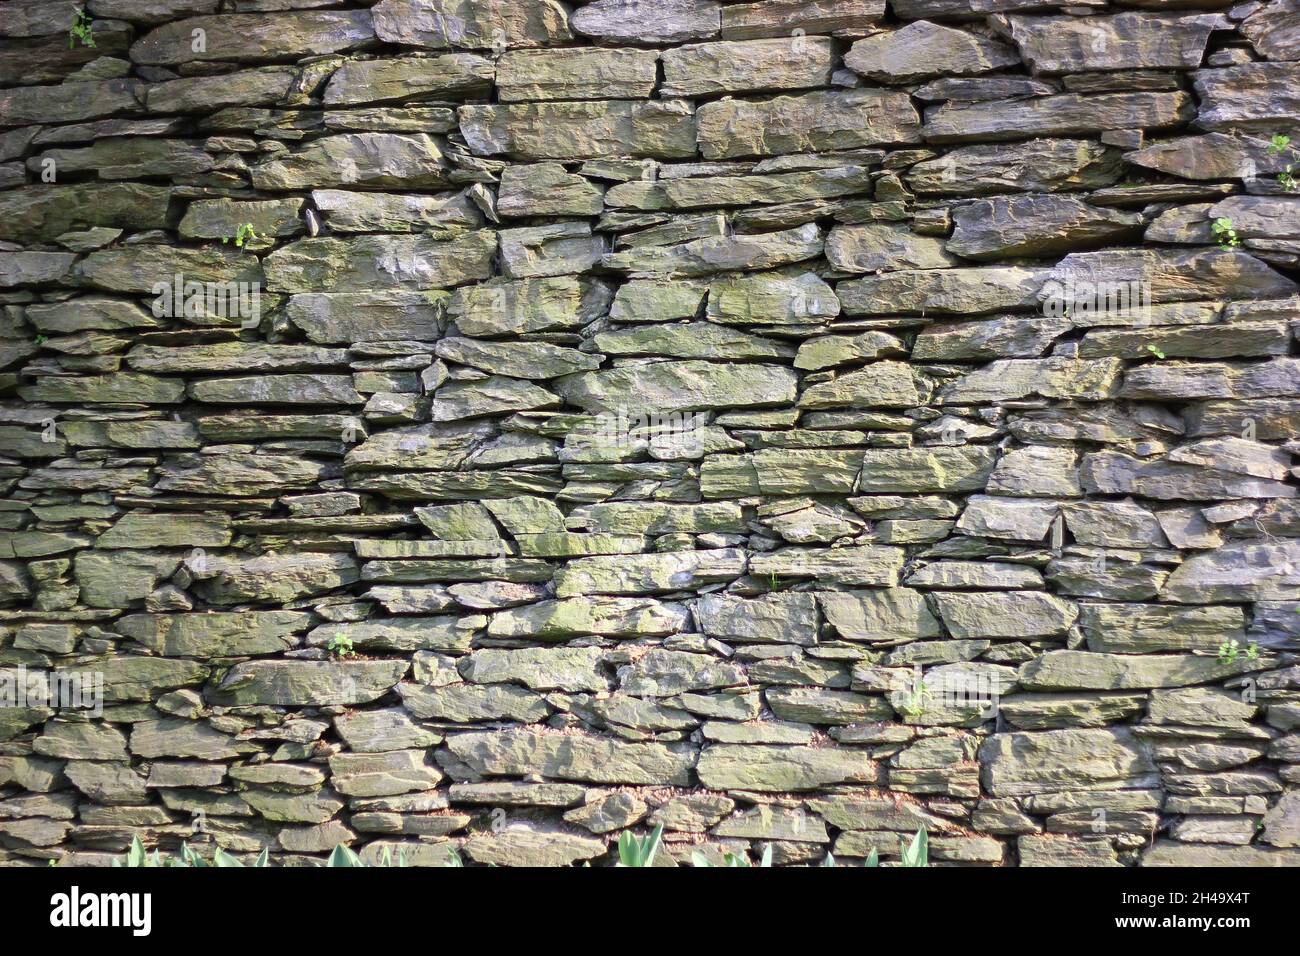 backgrounds full frame Wall Architecture stone wall Textured pattern built structure solid wall - building feature no people day brick rough stone mat Stock Photo